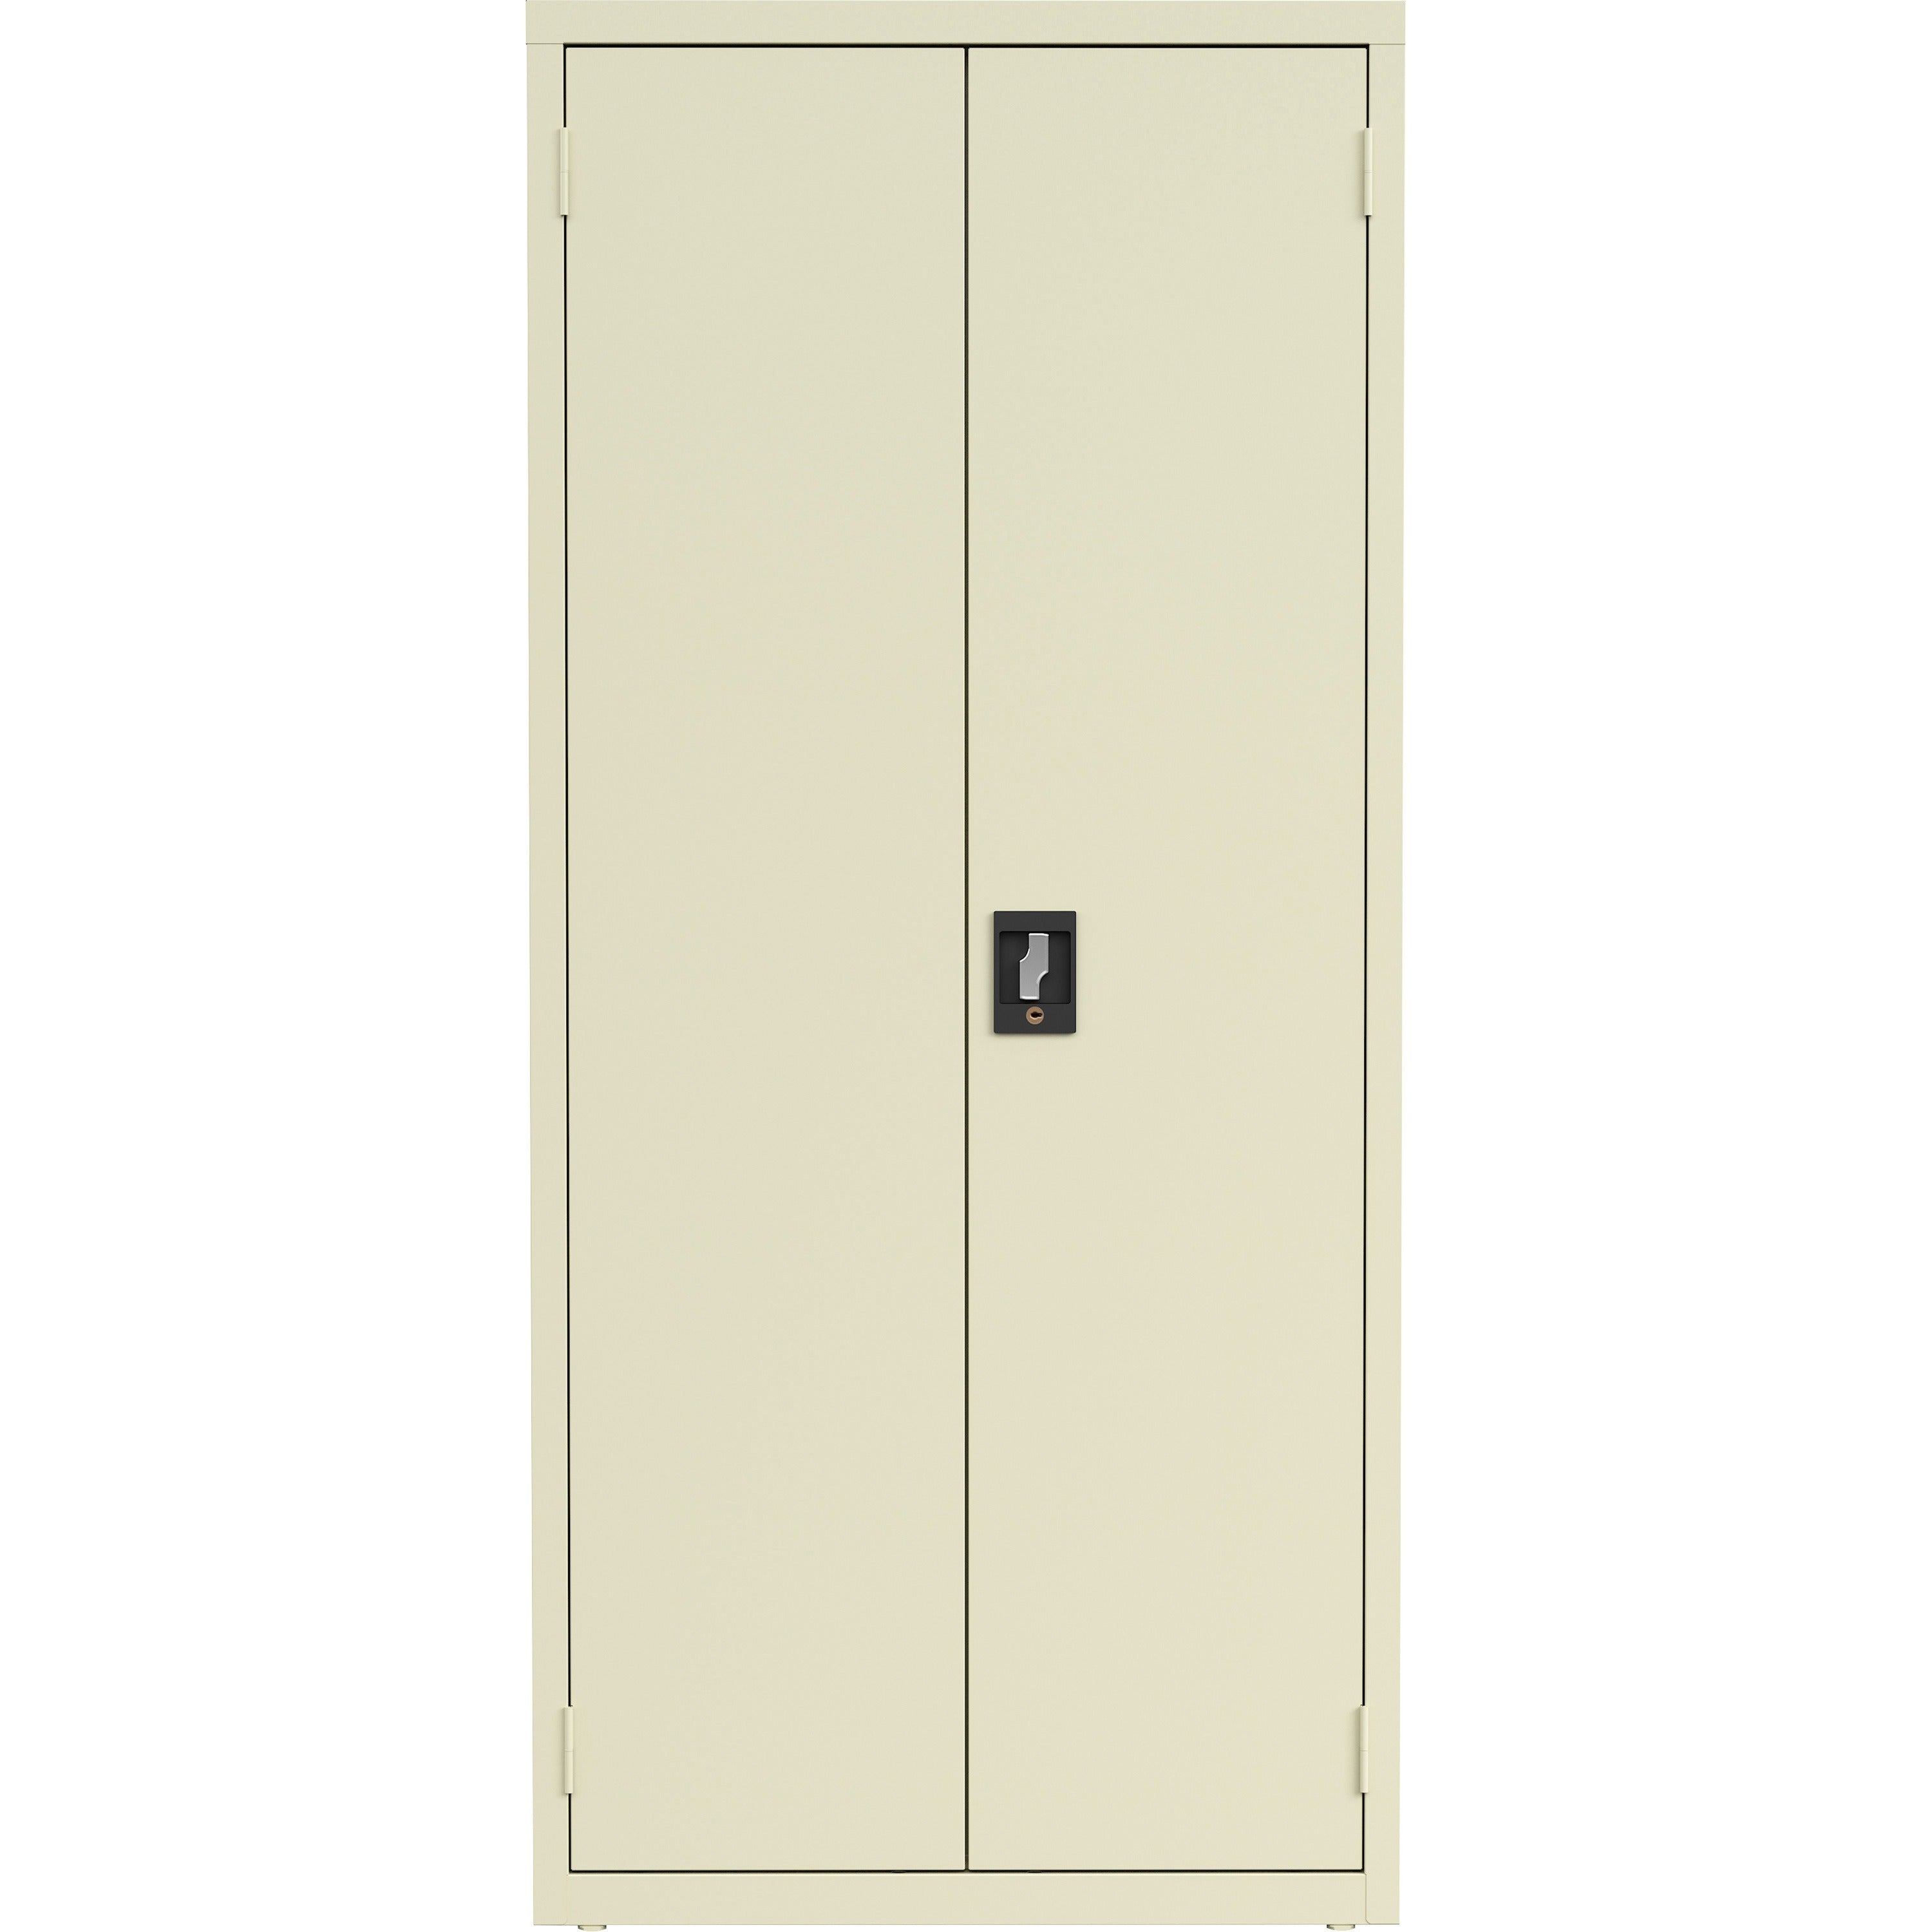 lorell-fortress-series-slimline-storage-cabinet-30-x-15-x-66-4-x-shelfves-720-lb-load-capacity-durable-welded-nonporous-surface-recessed-handle-removable-lock-locking-system-putty-baked-enamel-steel-recycled_llr69830pty - 2